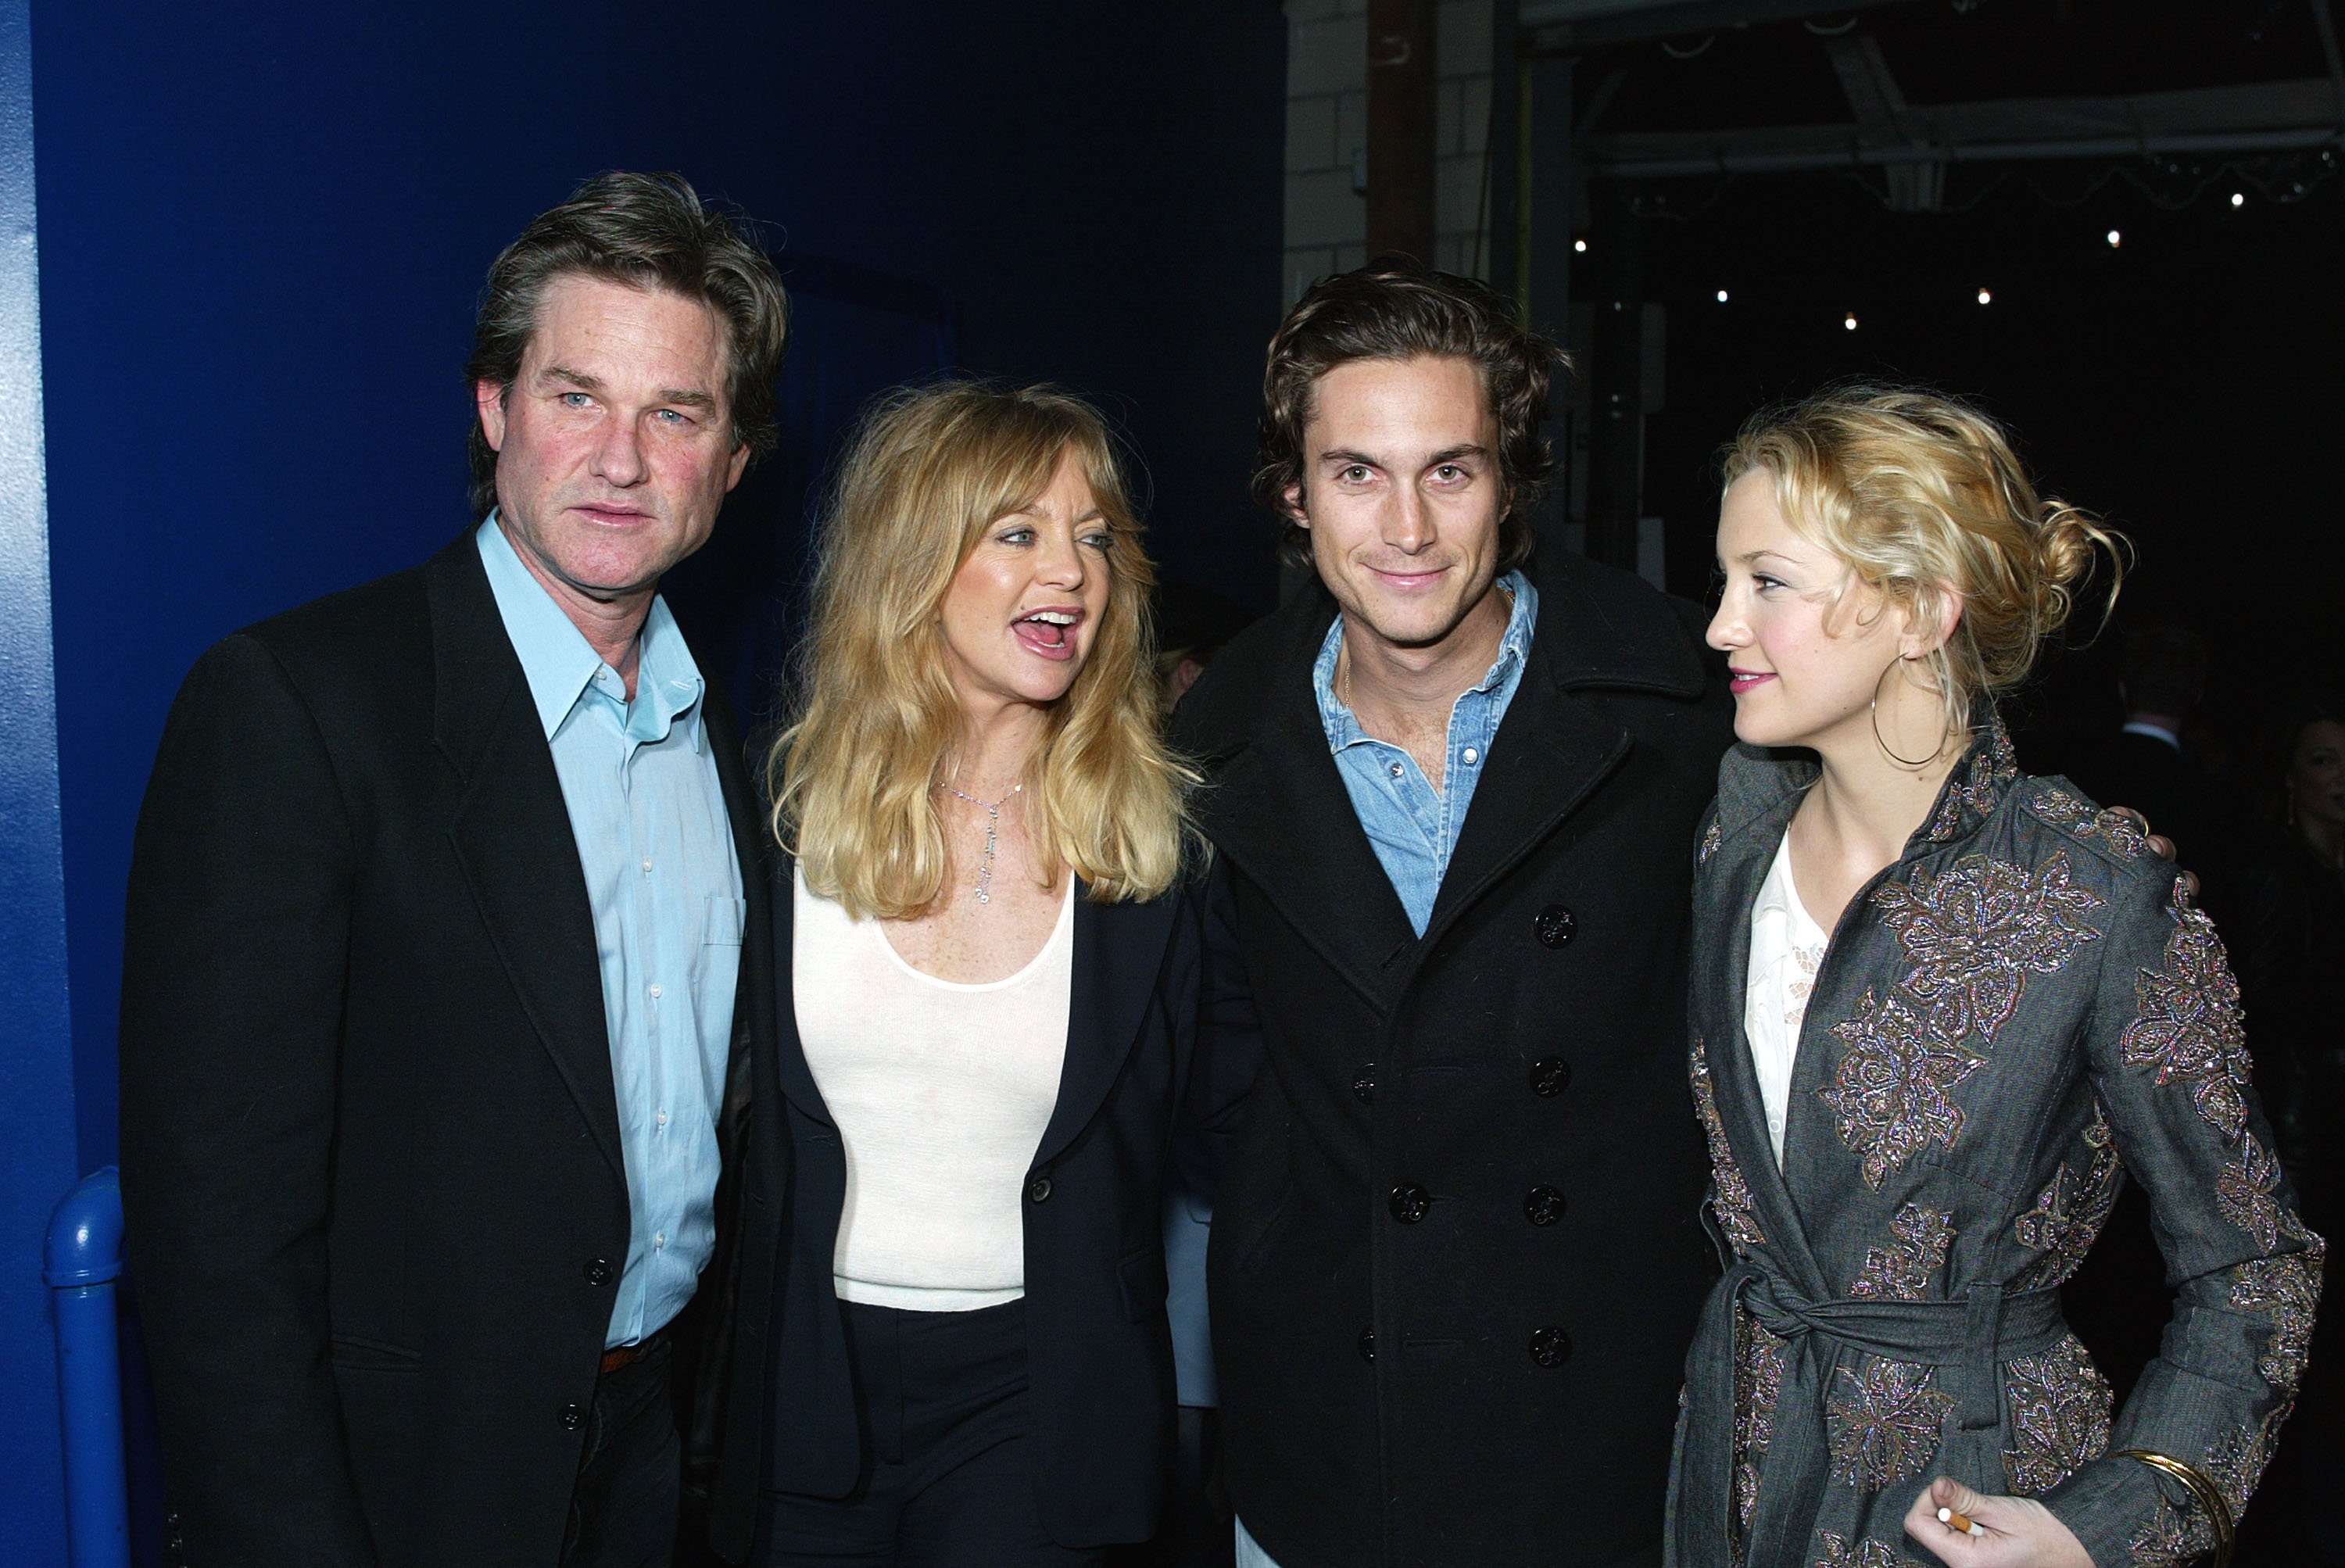 (L-R) Actors Kurt Russell, Goldie Hawn, Oliver Hudson and Kate Hudson pose at the post-premiere party for "Dark Blue" on February 12, 2003 in Los Angeles, California | Source: Getty Images